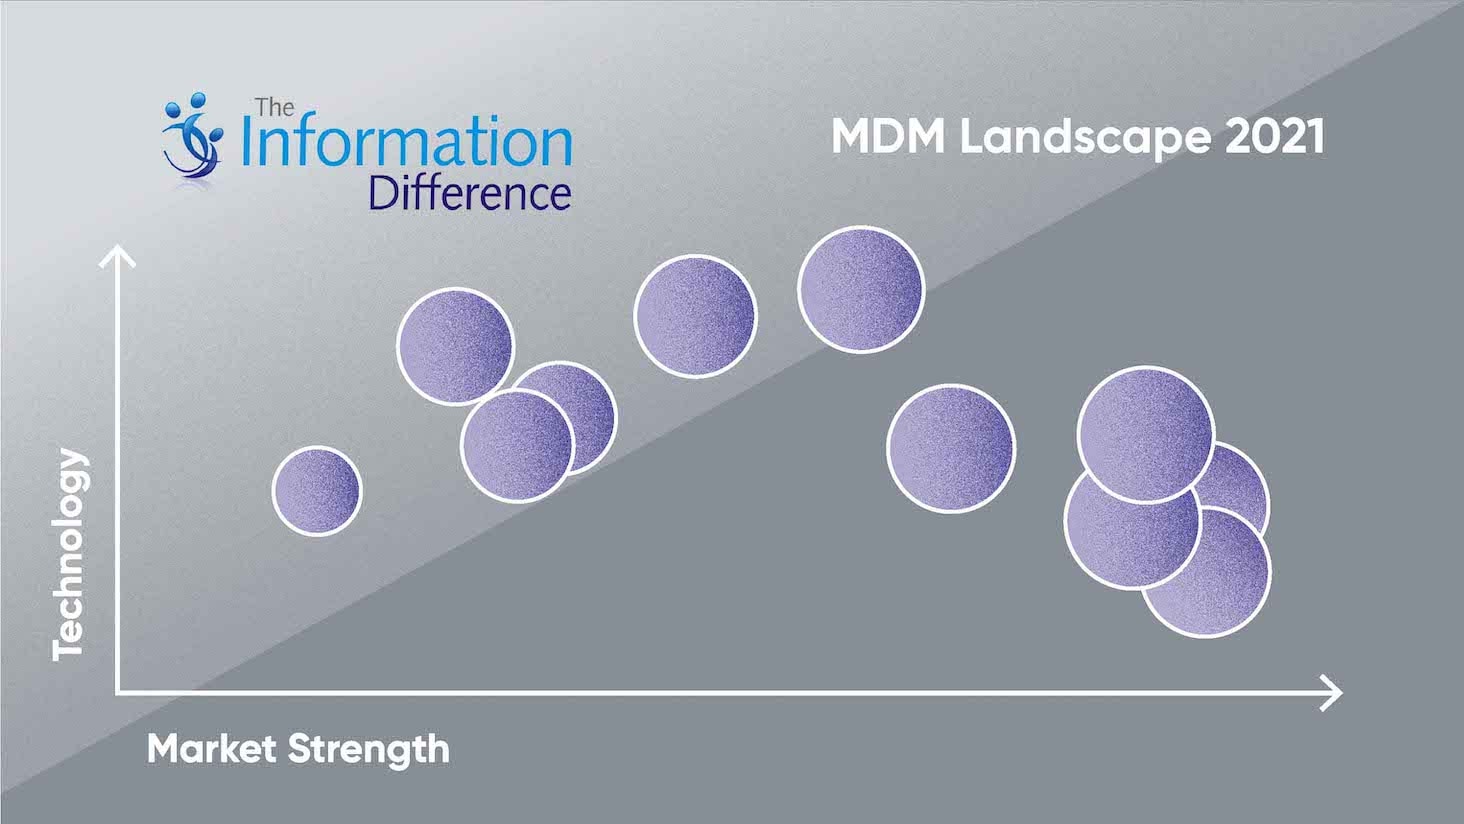 The Information Difference MDM Landscape 2021